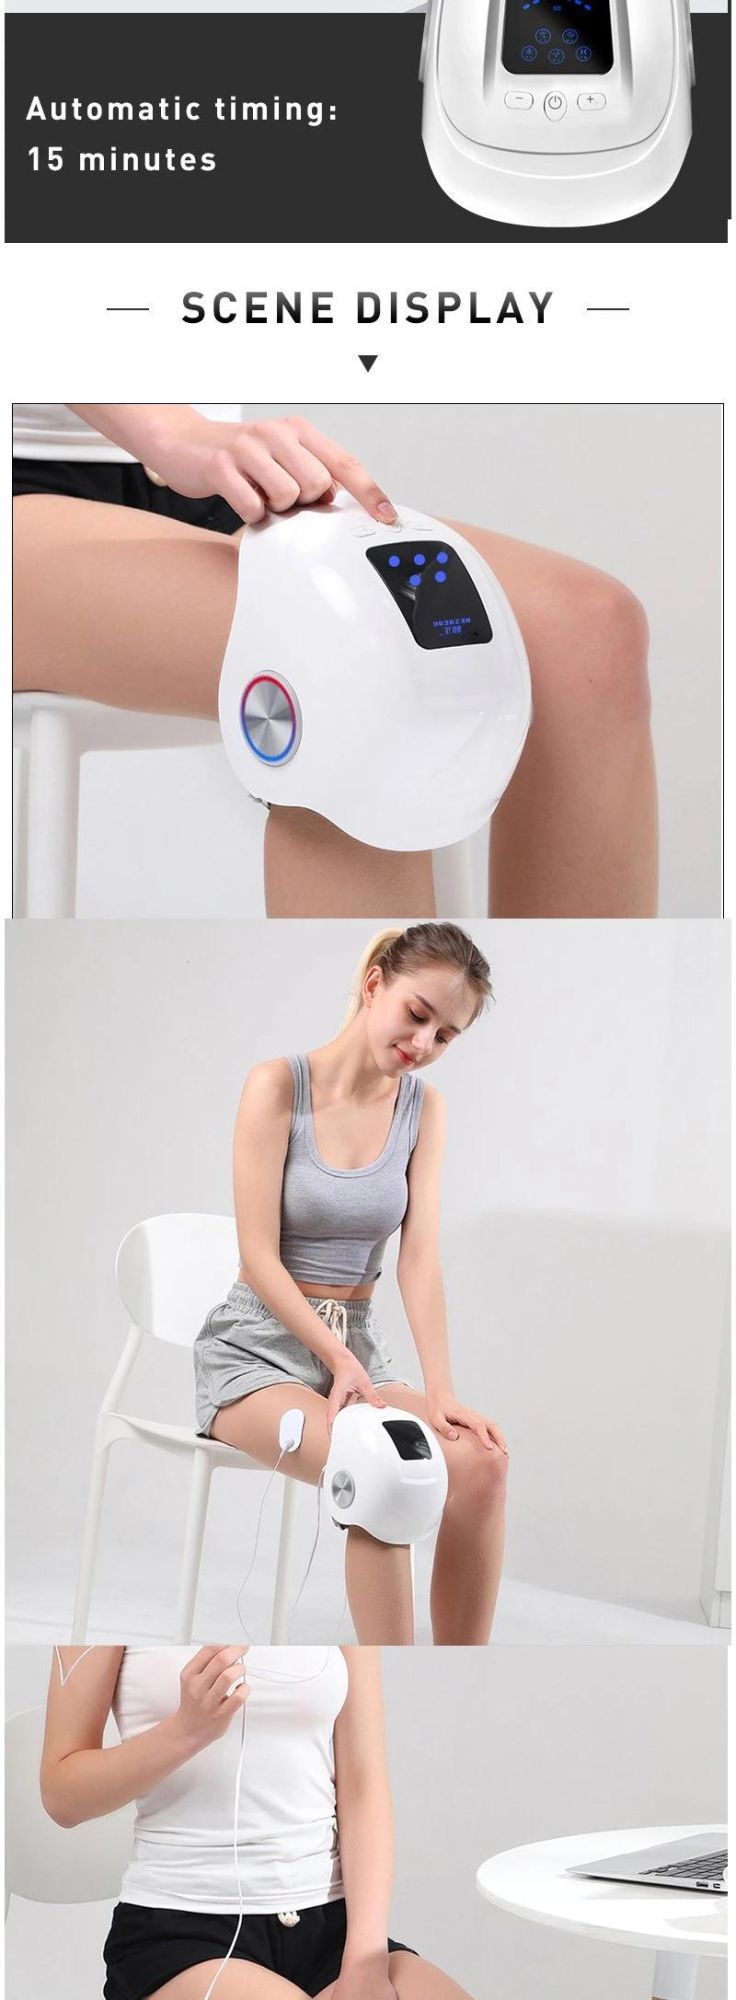 New Product Air Pressure Pulse Joint Vibrator Home Digital Knee Pain Massager